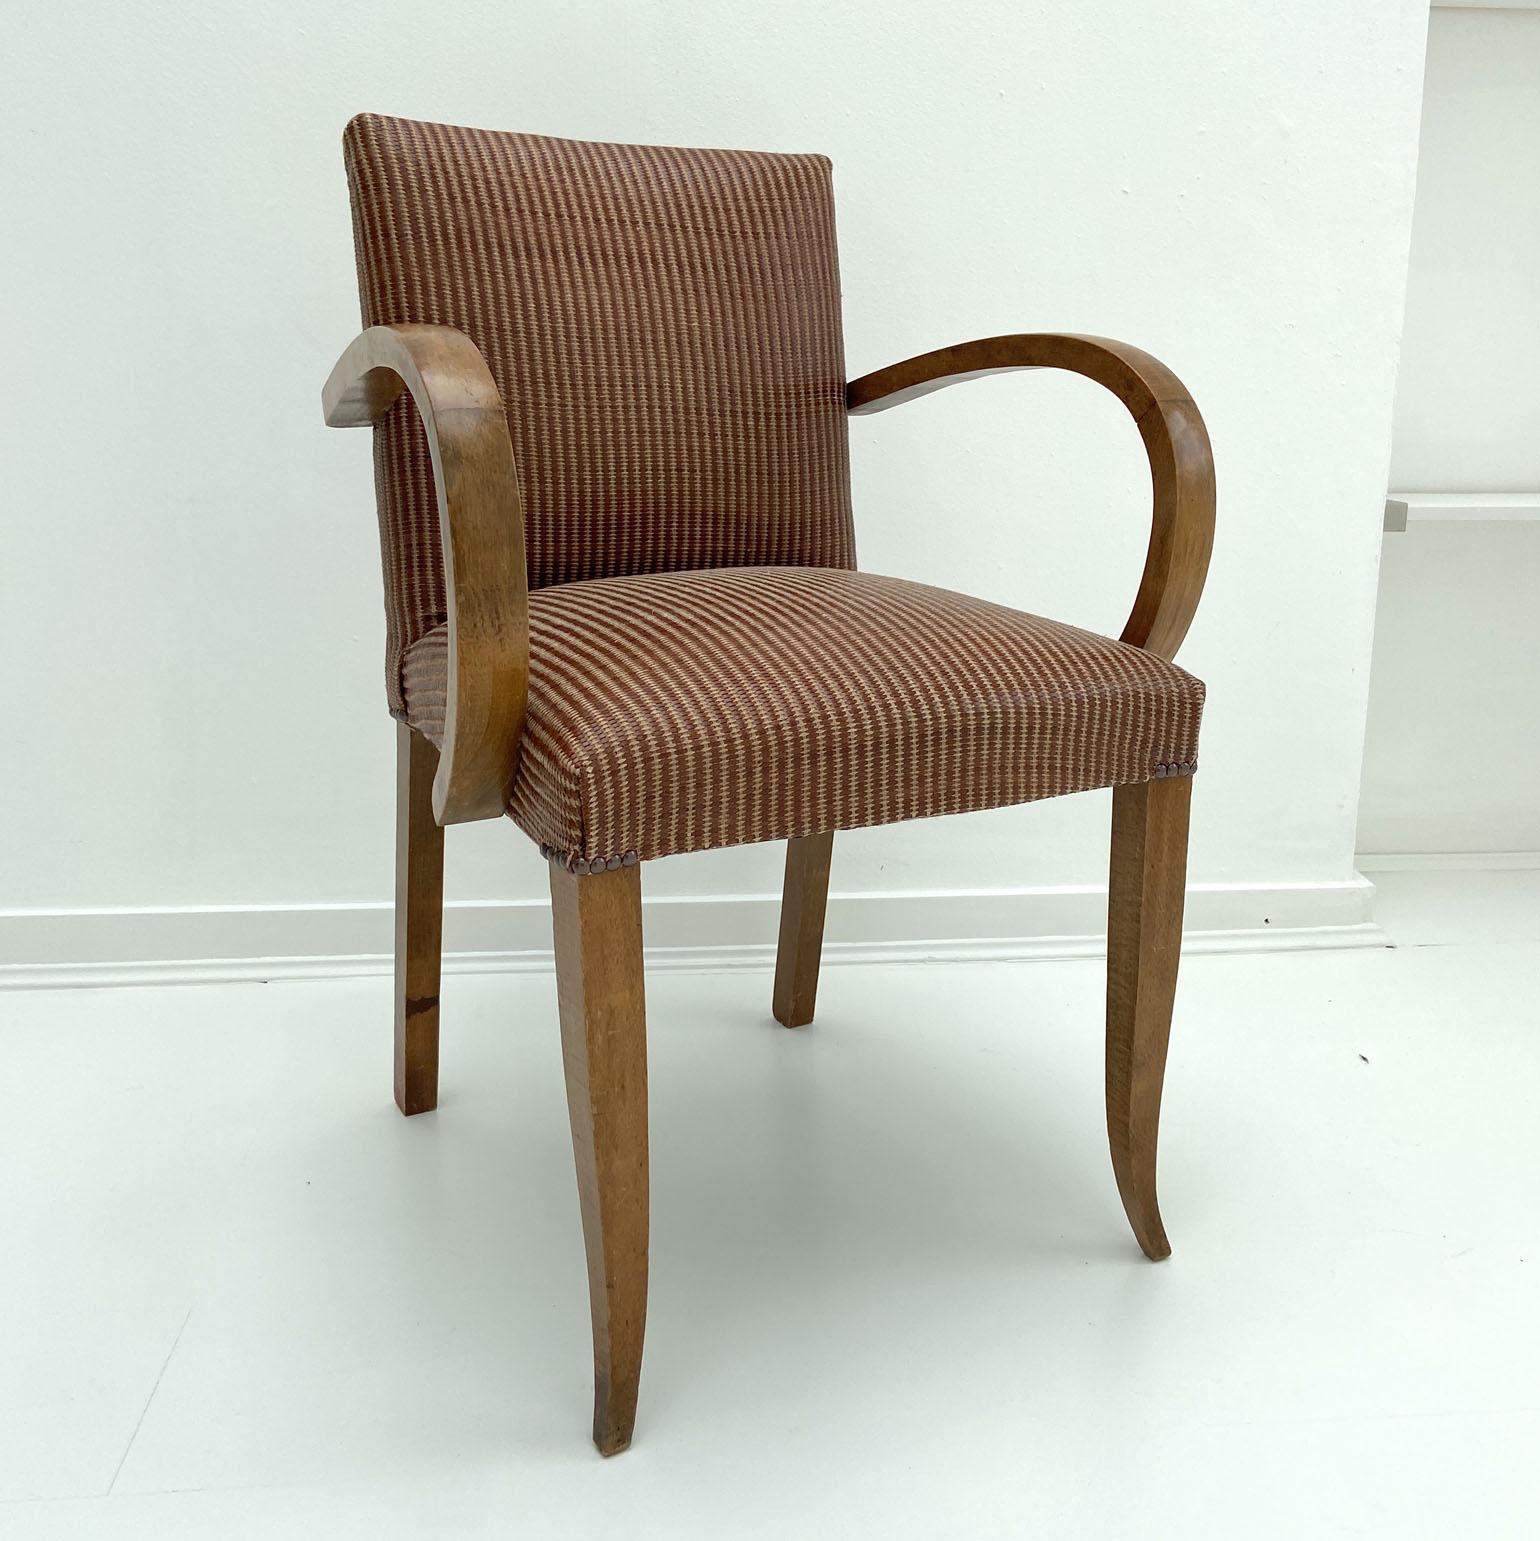 Pair of Modernist Bridge Chairs or Armchairs, French, 1930s For Sale 2